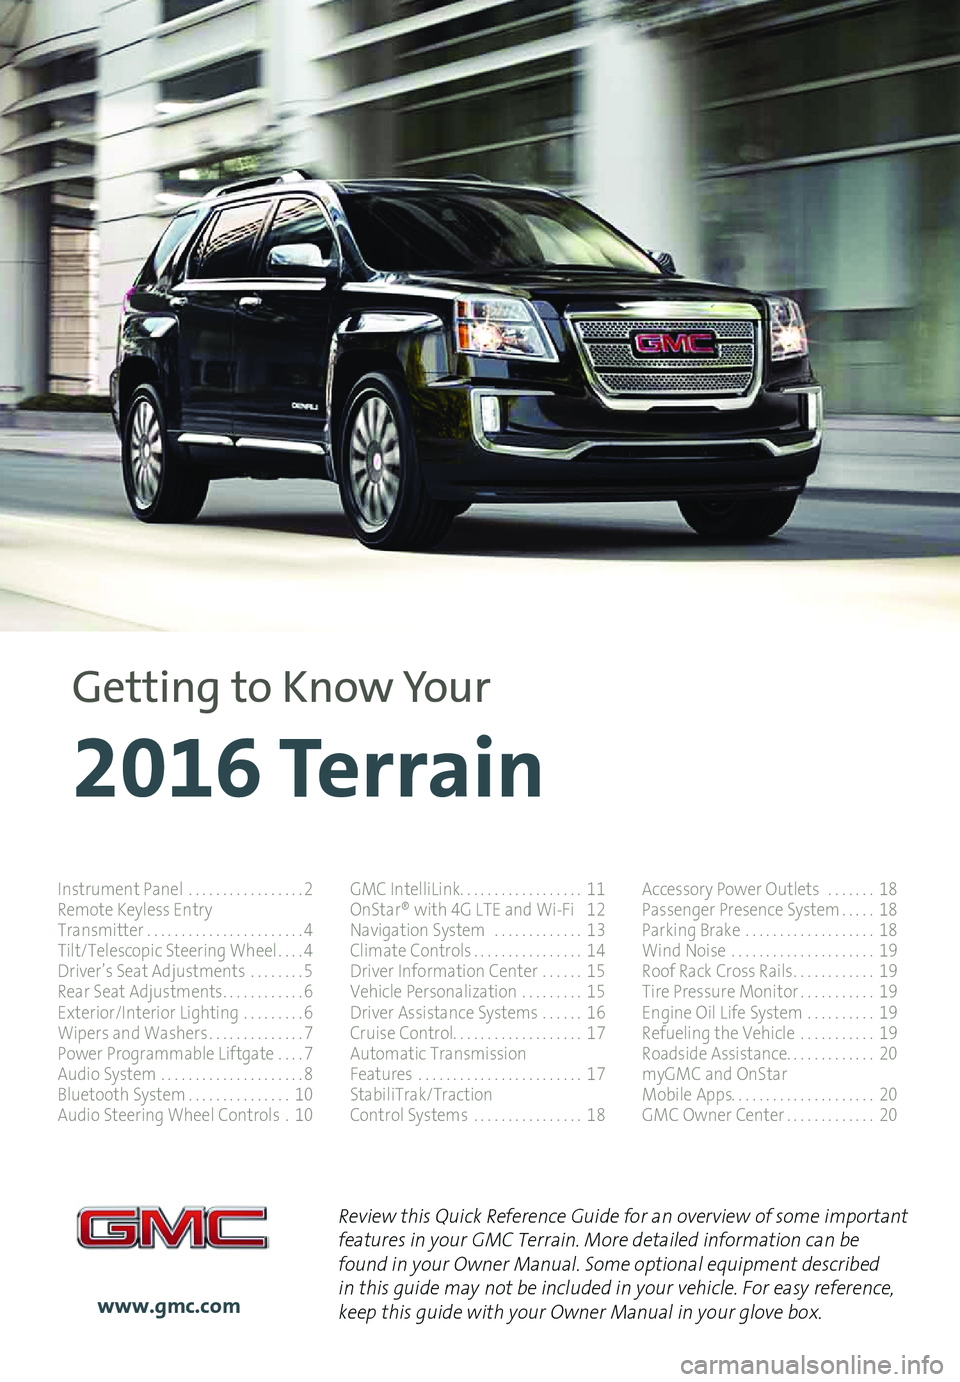 GMC TERRAIN 2016  Get To Know Guide 